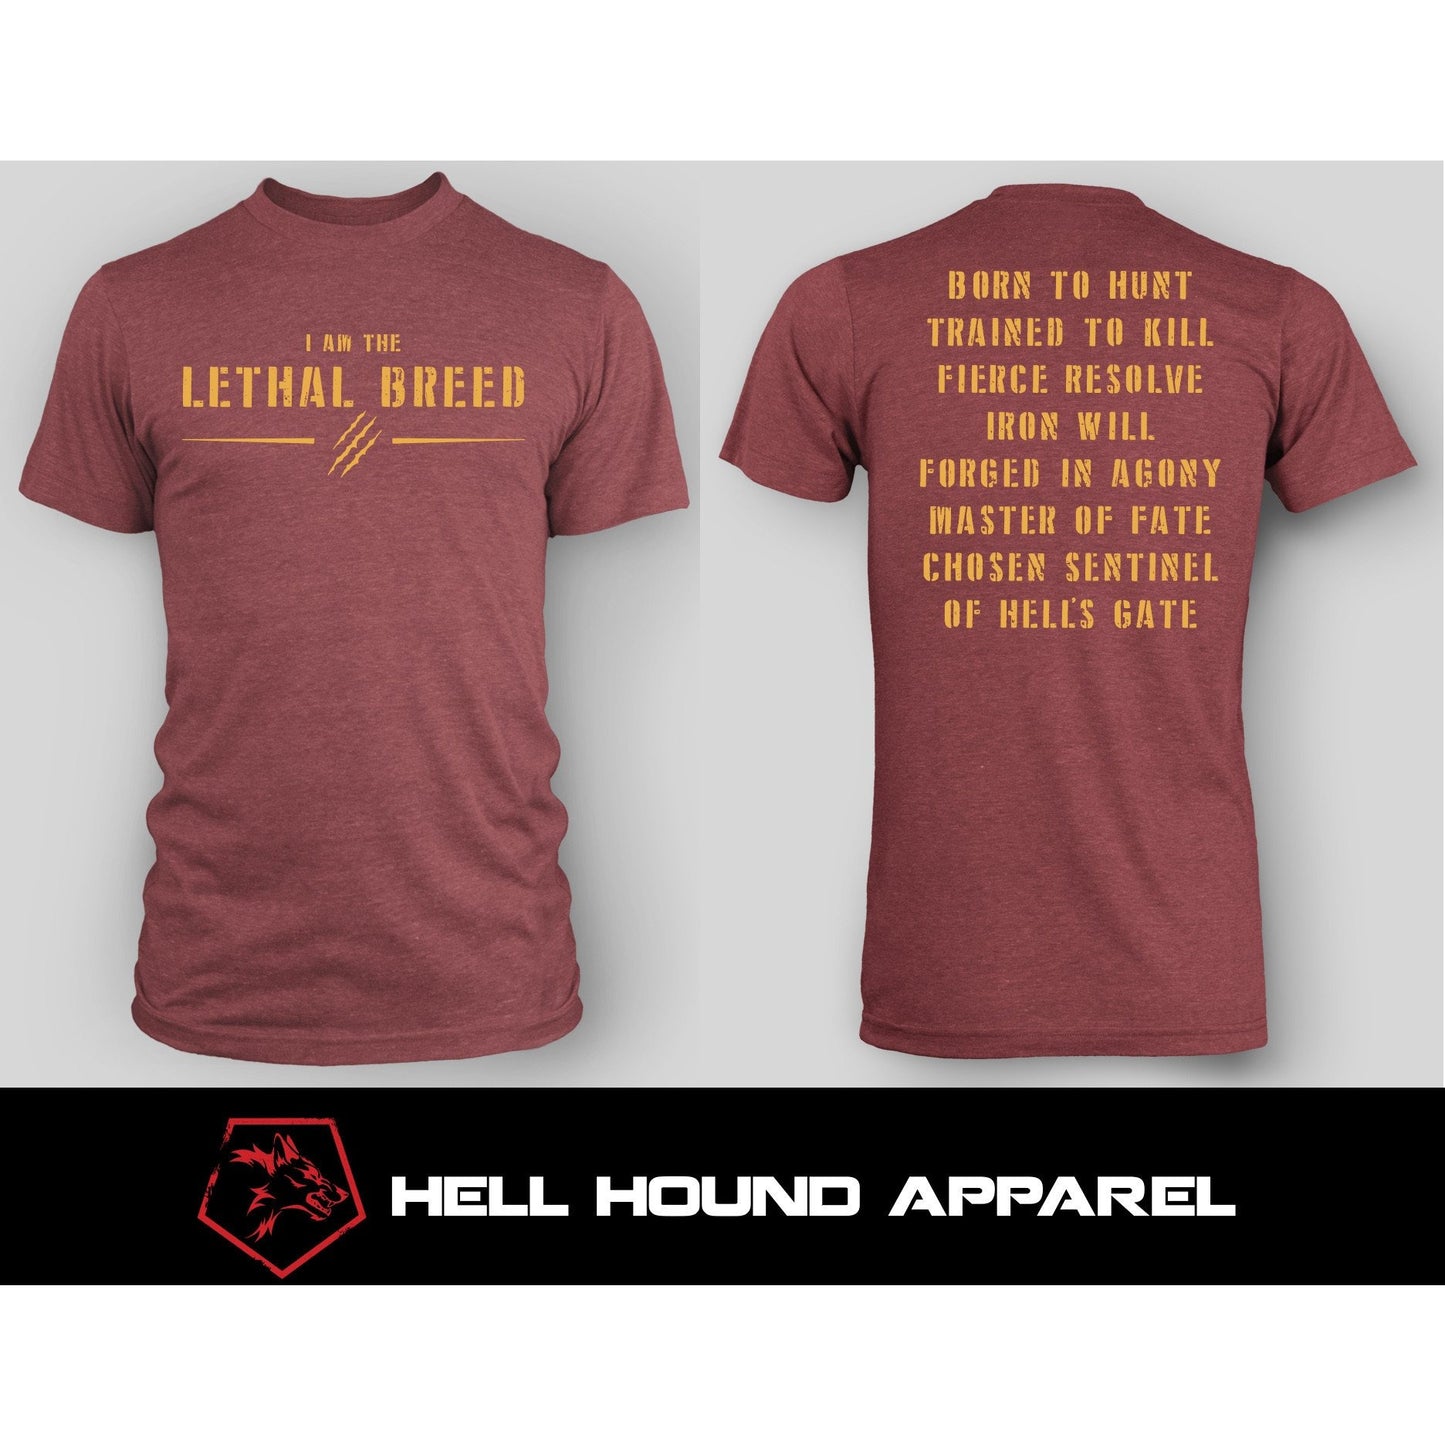 I AM THE LETHAL BREED 2ND GEN - 3 COLOR COMBOS